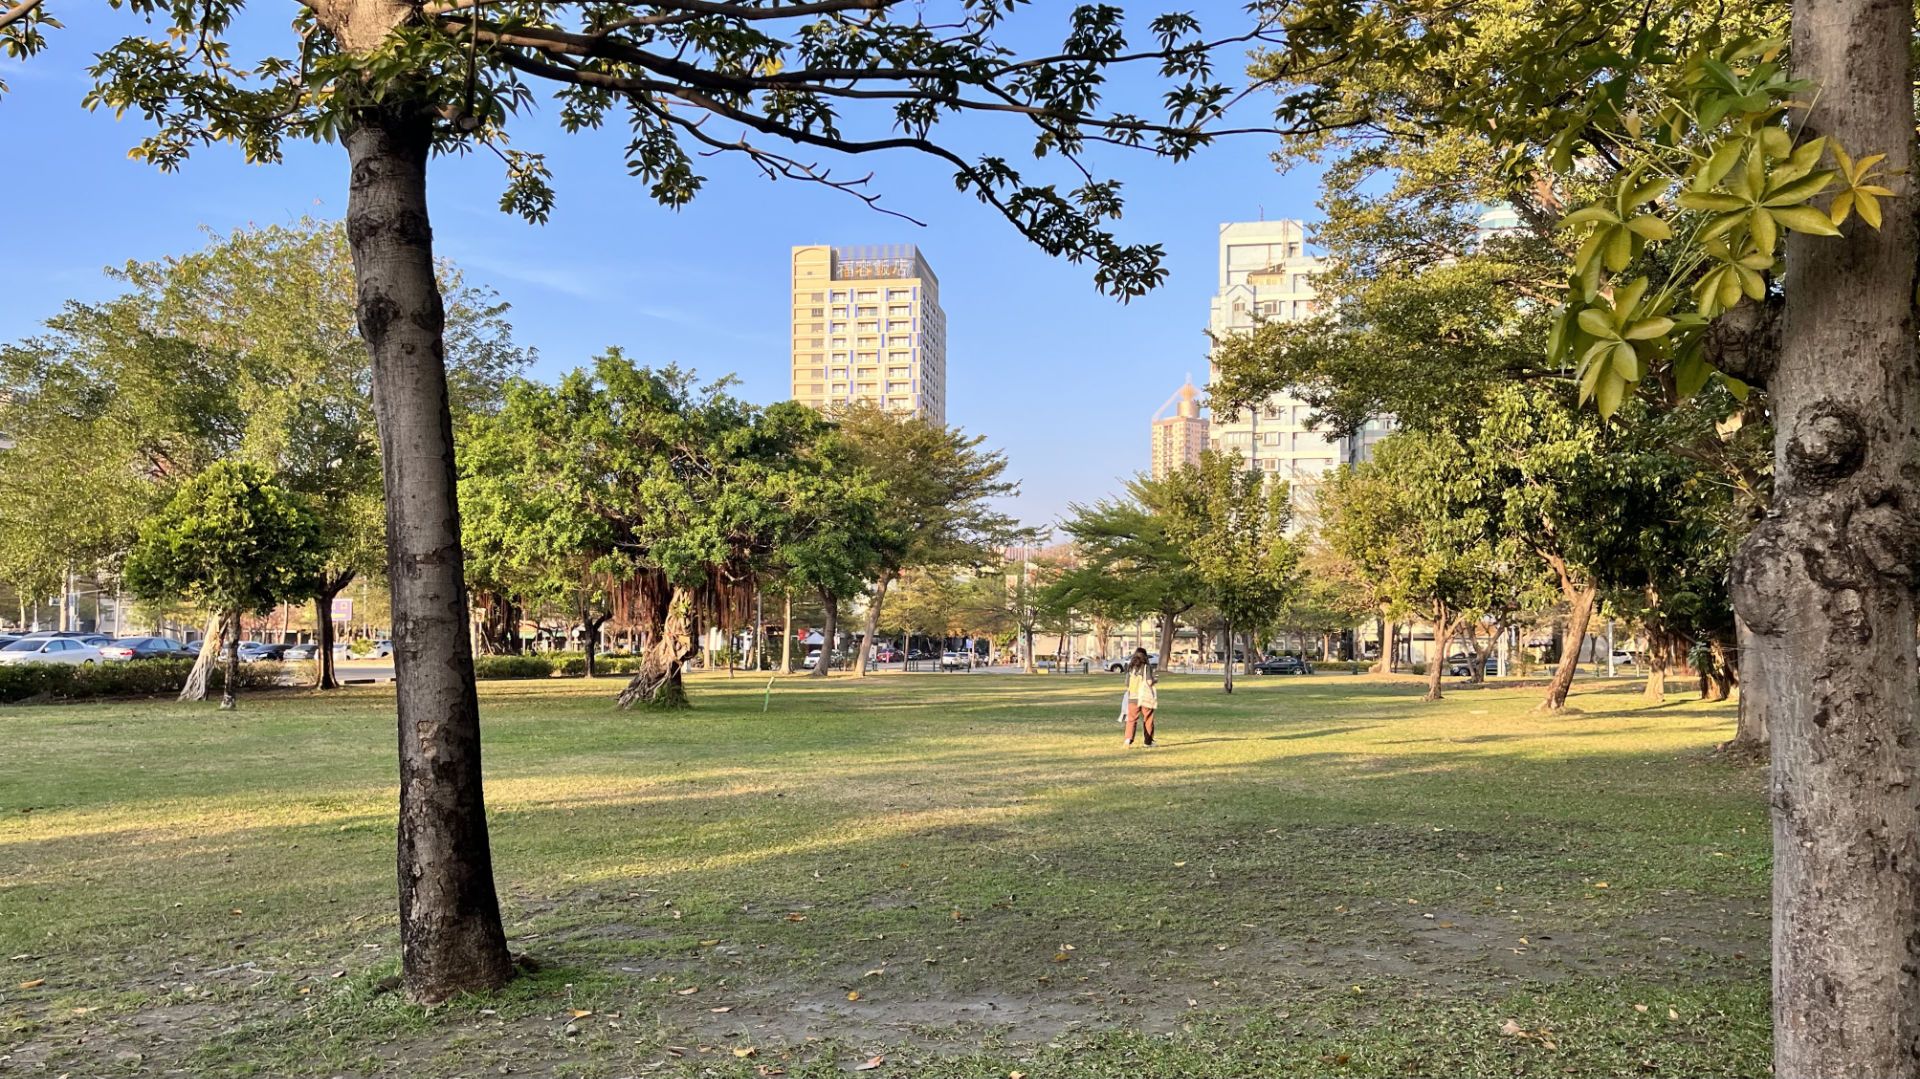 A woman walks across short grass in a park, with skyscrapers in the distance.